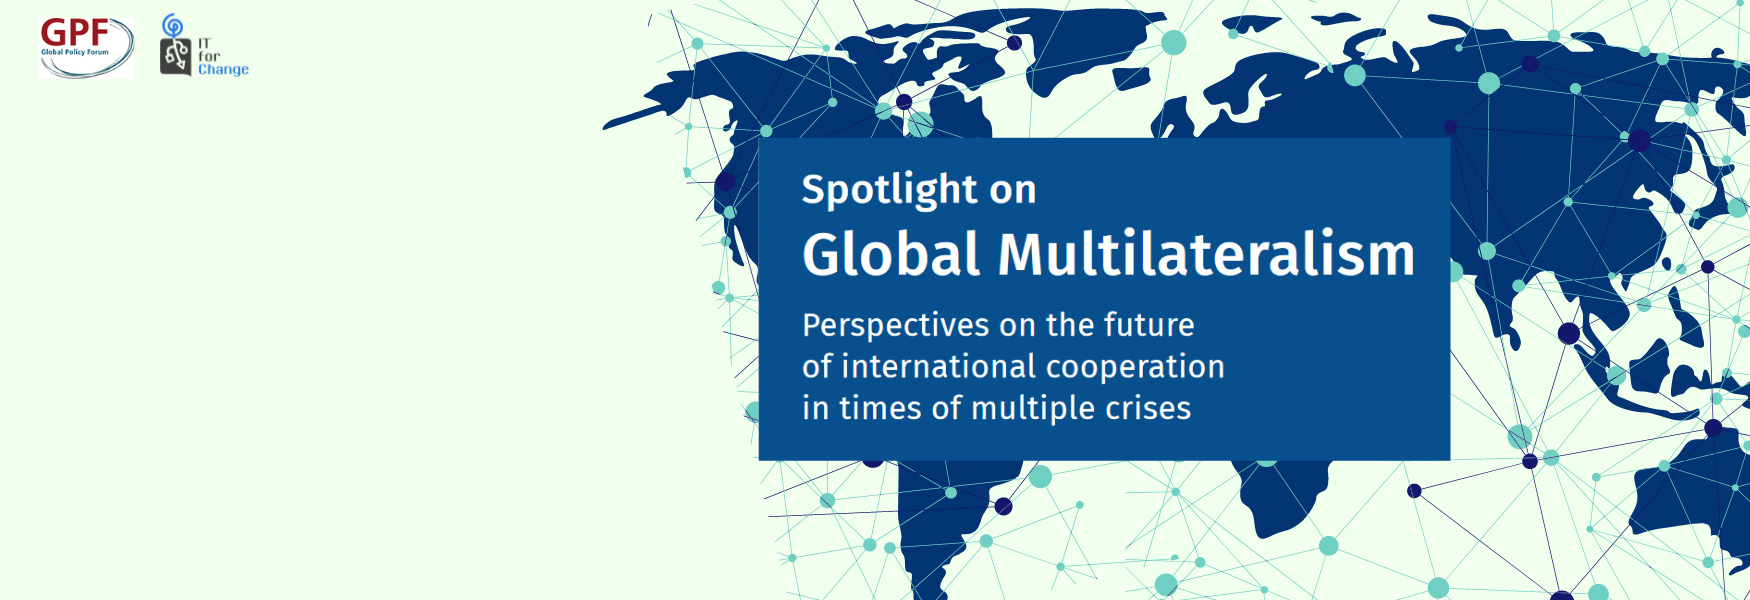 Spotlight on Global Multilateralism - Perspectives on the future of international cooperation in times of multiple crises